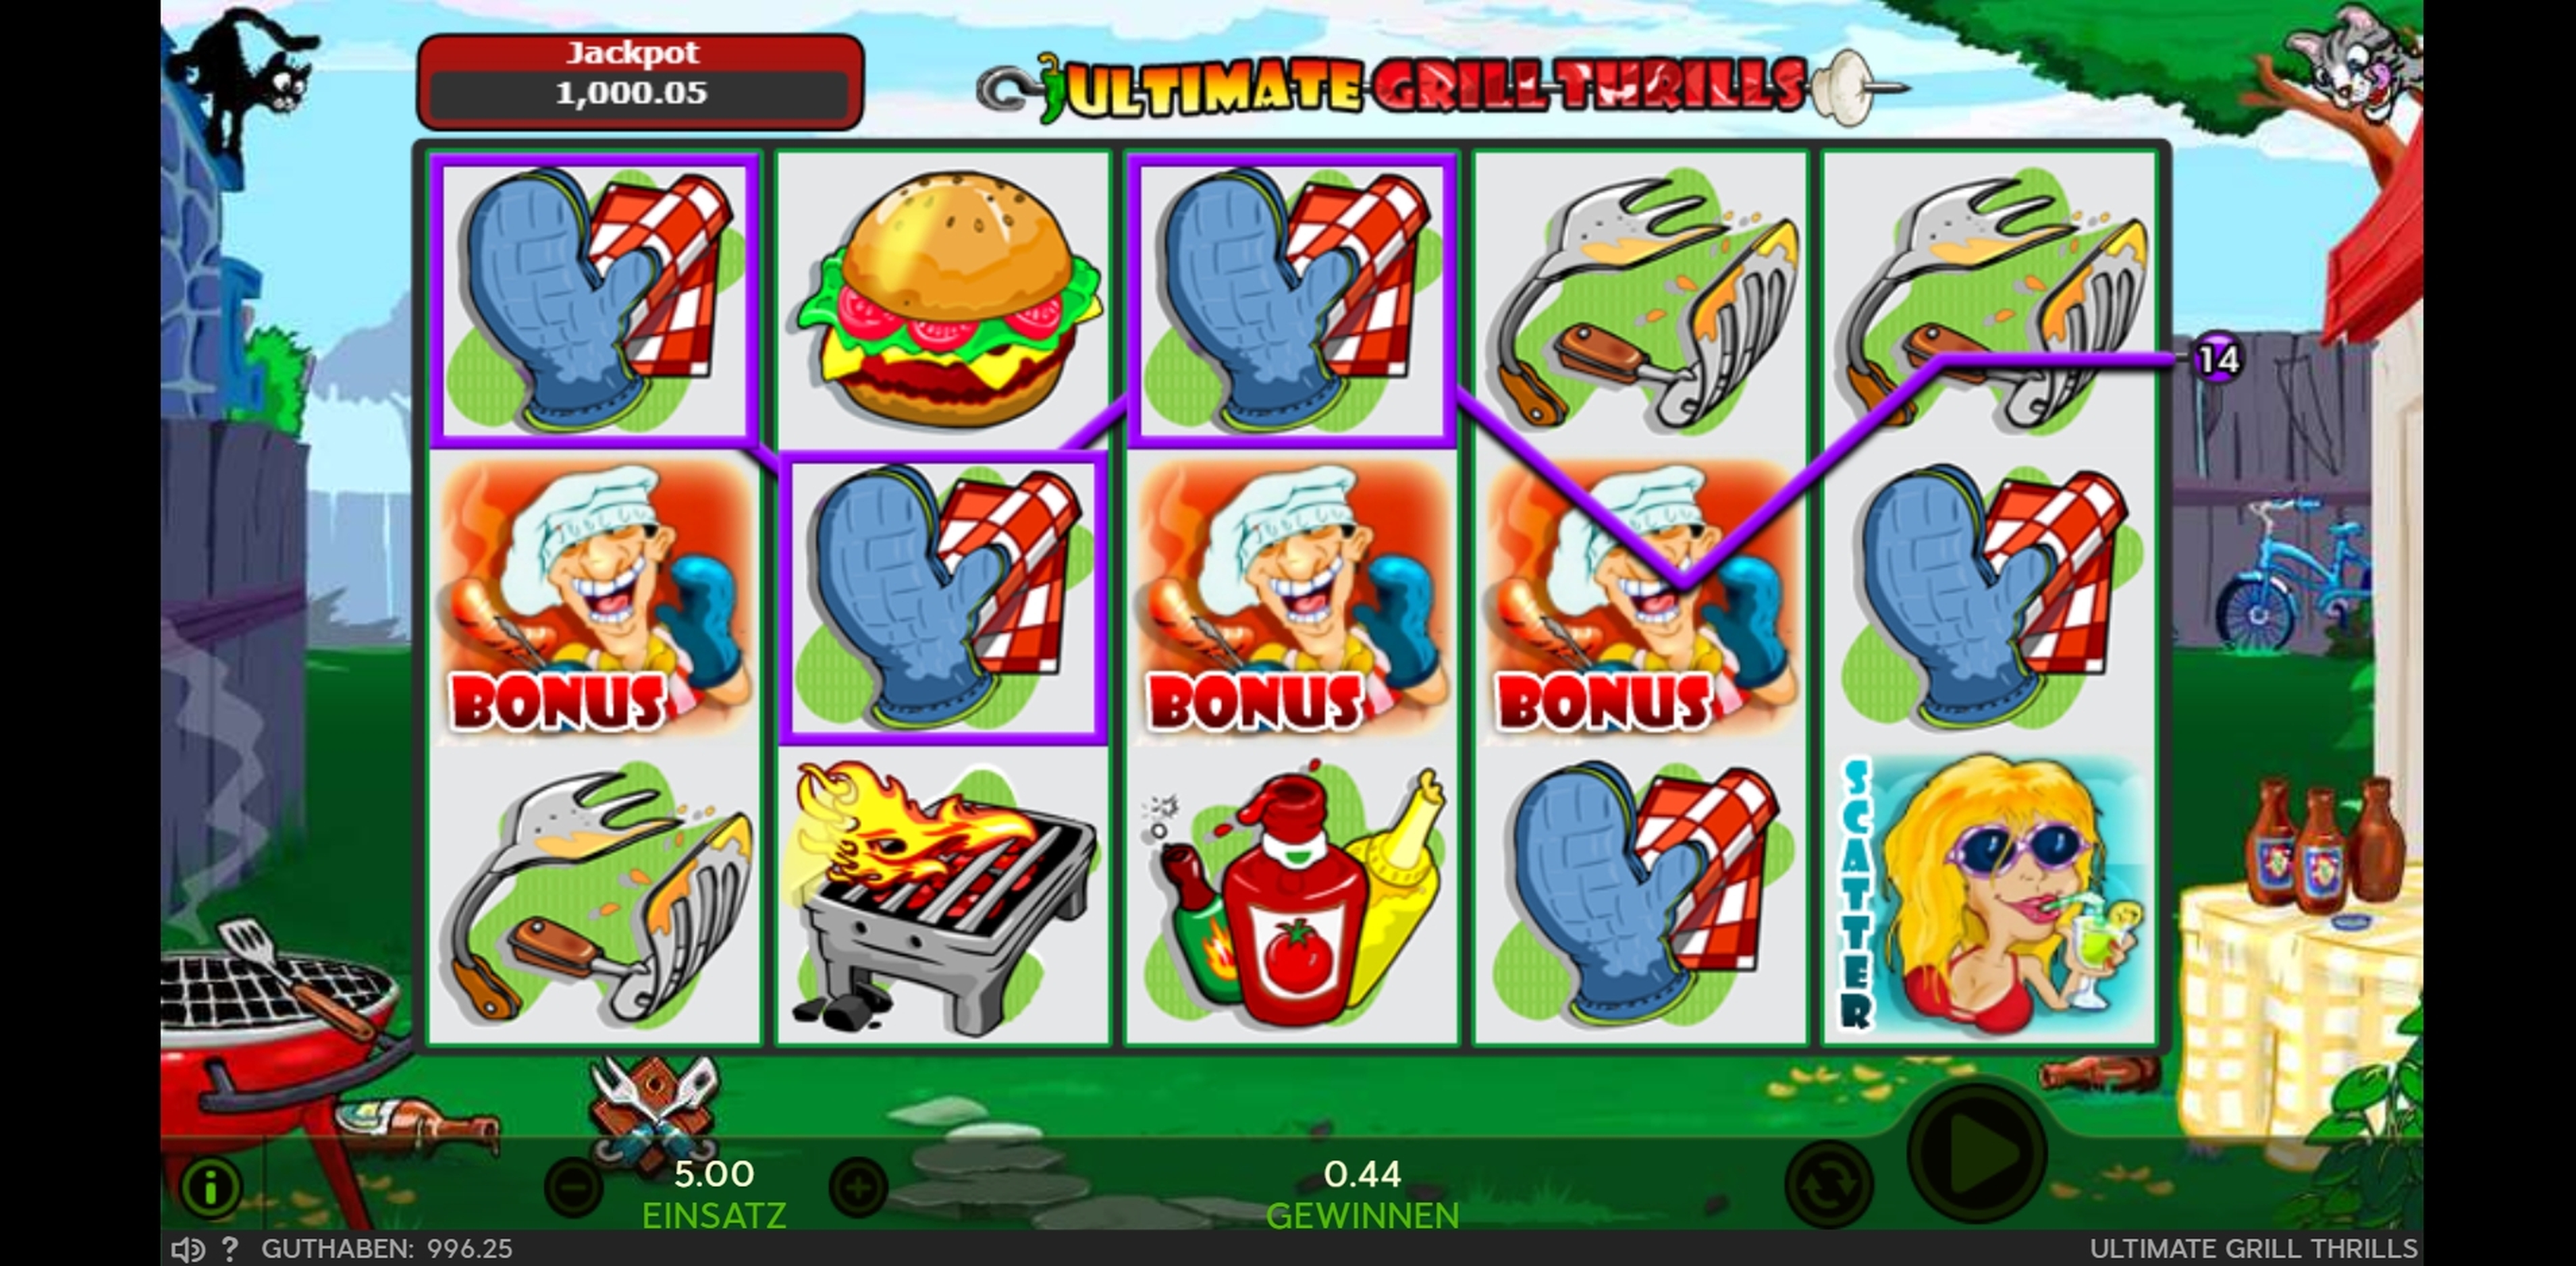 Win Money in Ultimate Grill Thrills Free Slot Game by 888 Gaming